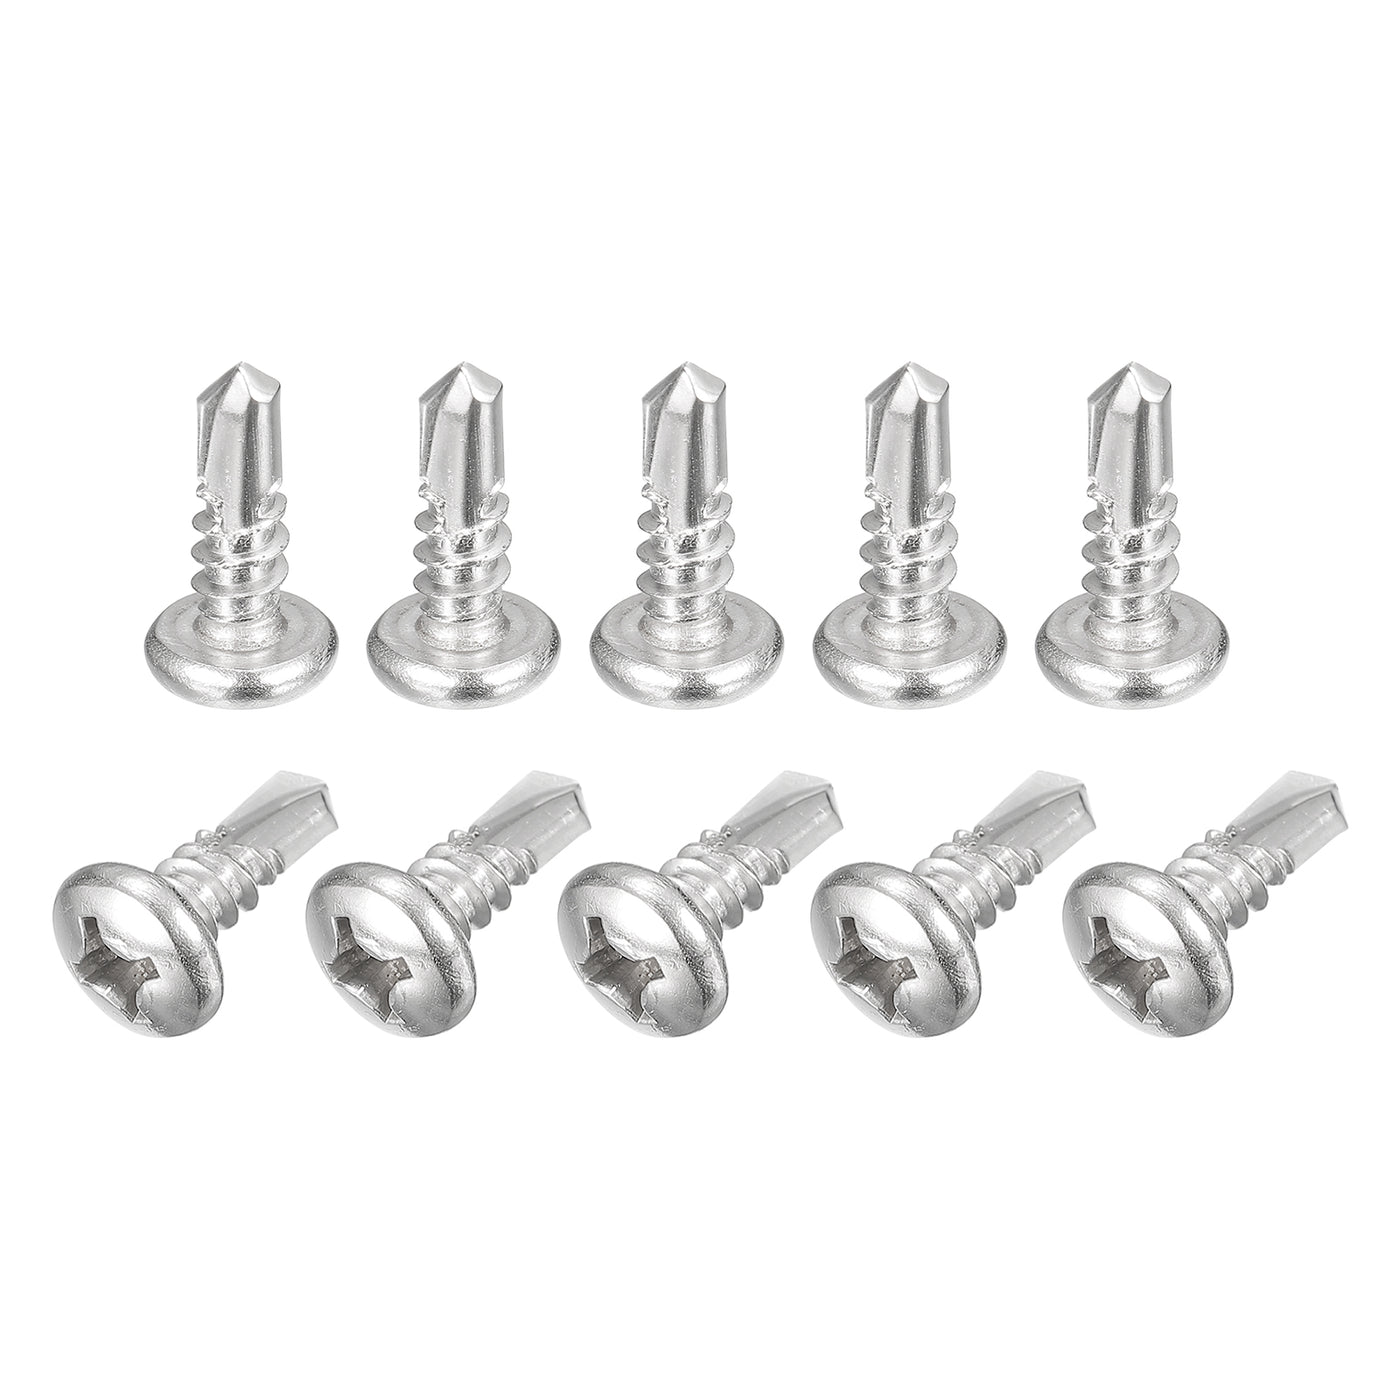 uxcell Uxcell #12 x 5/8" Self Drilling Screws, 20pcs Phillips Pan Head Self Tapping Screws